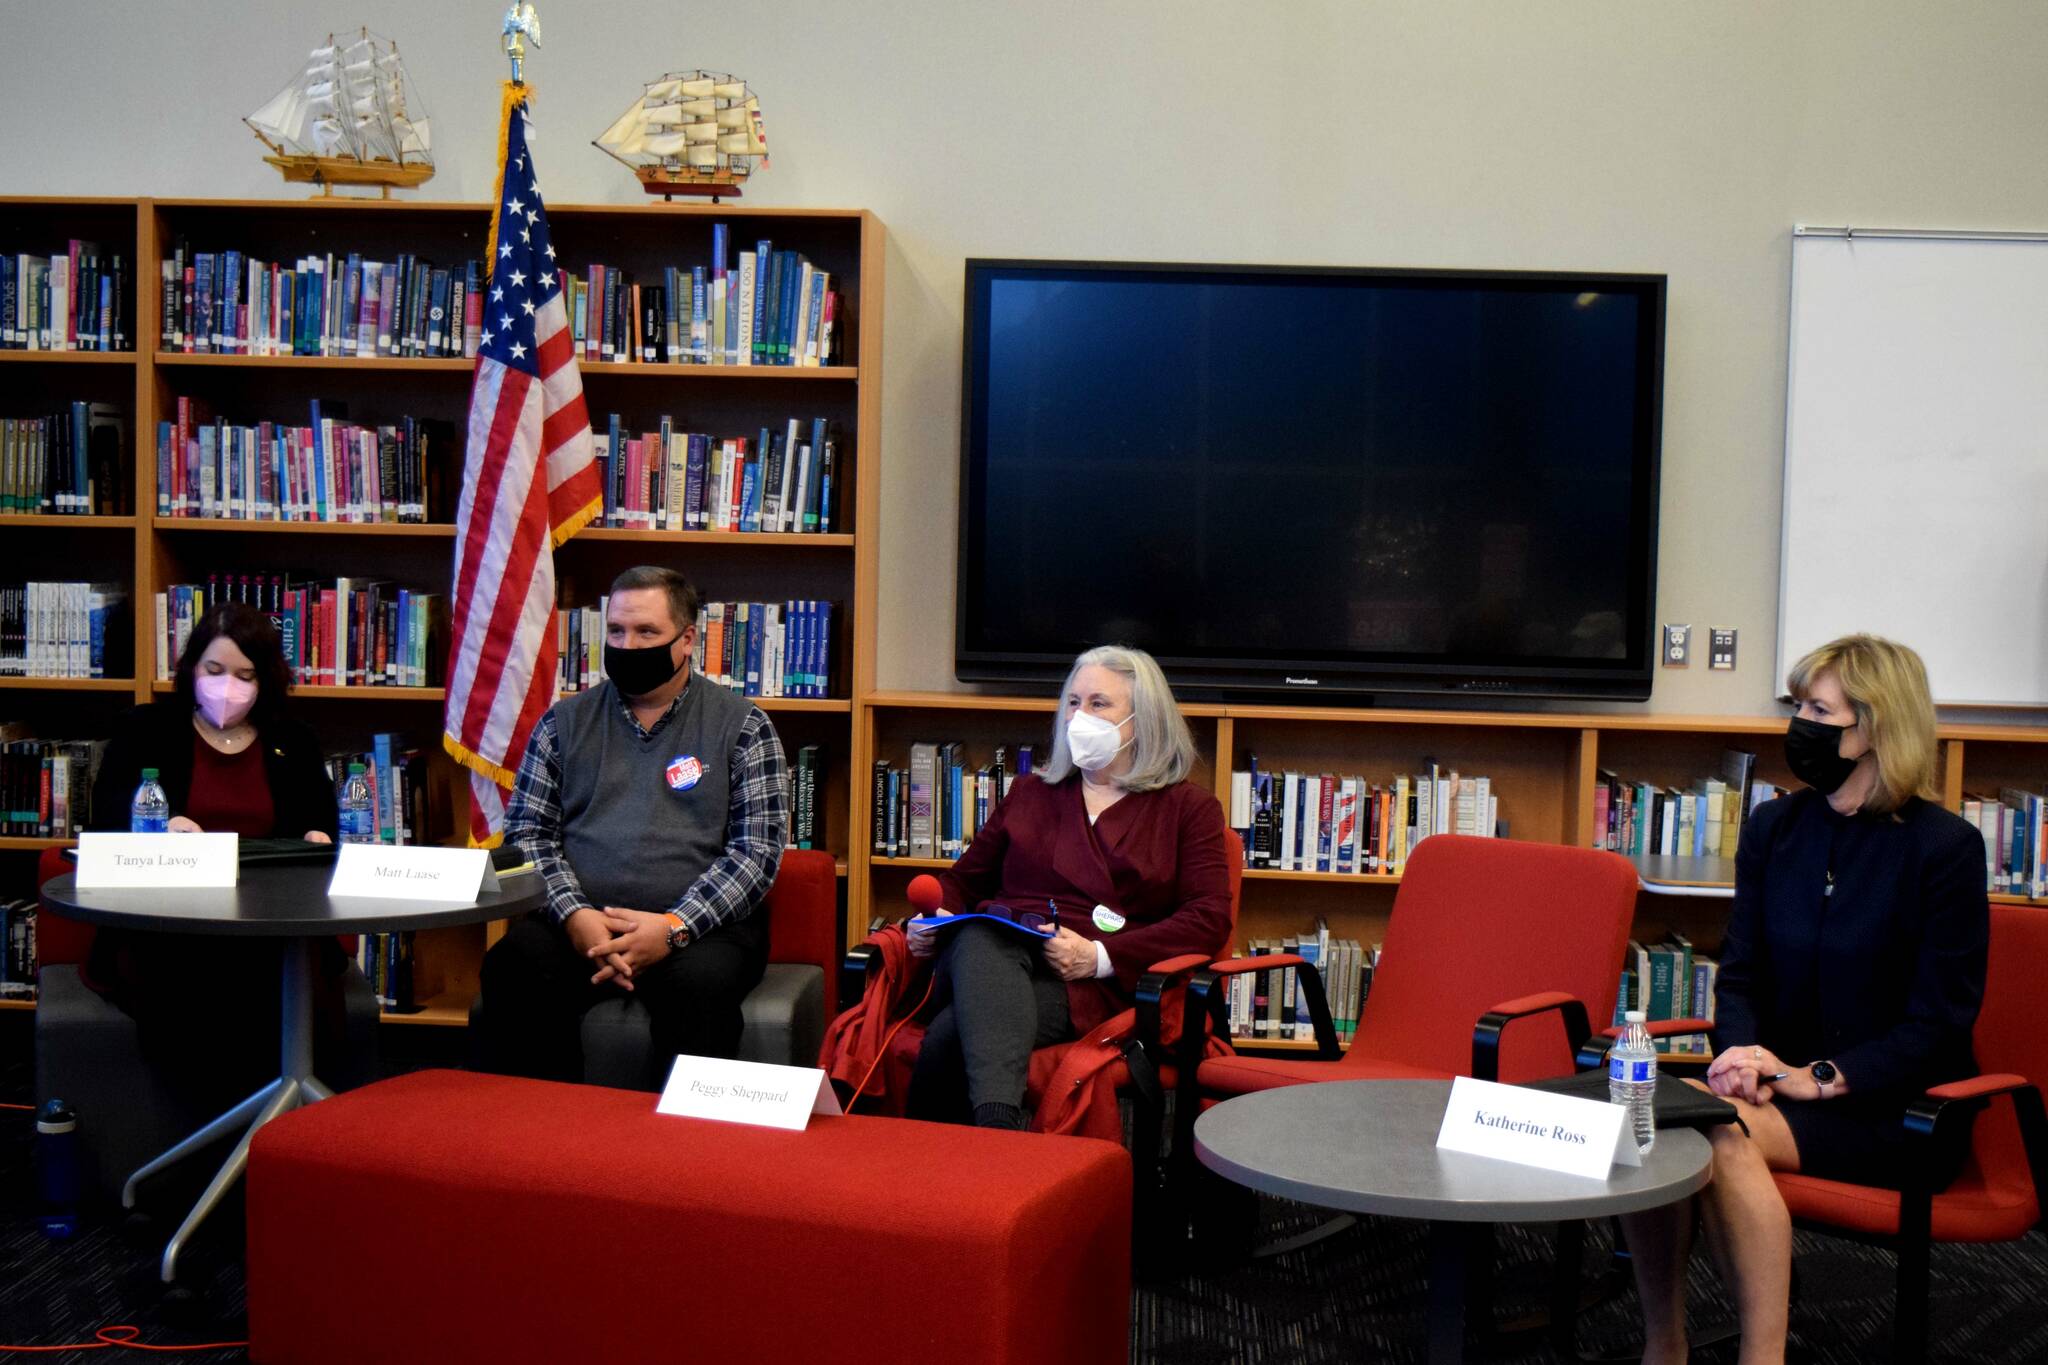 Snoqualmie mayor and city council candidates at the Snoqualmie Valley Chamber of Commerce candidate forum. From left: Council candidates Tanya Lavoy and Matt Laase. Mayor candidates: Peggy Shepard and Katherine Ross.